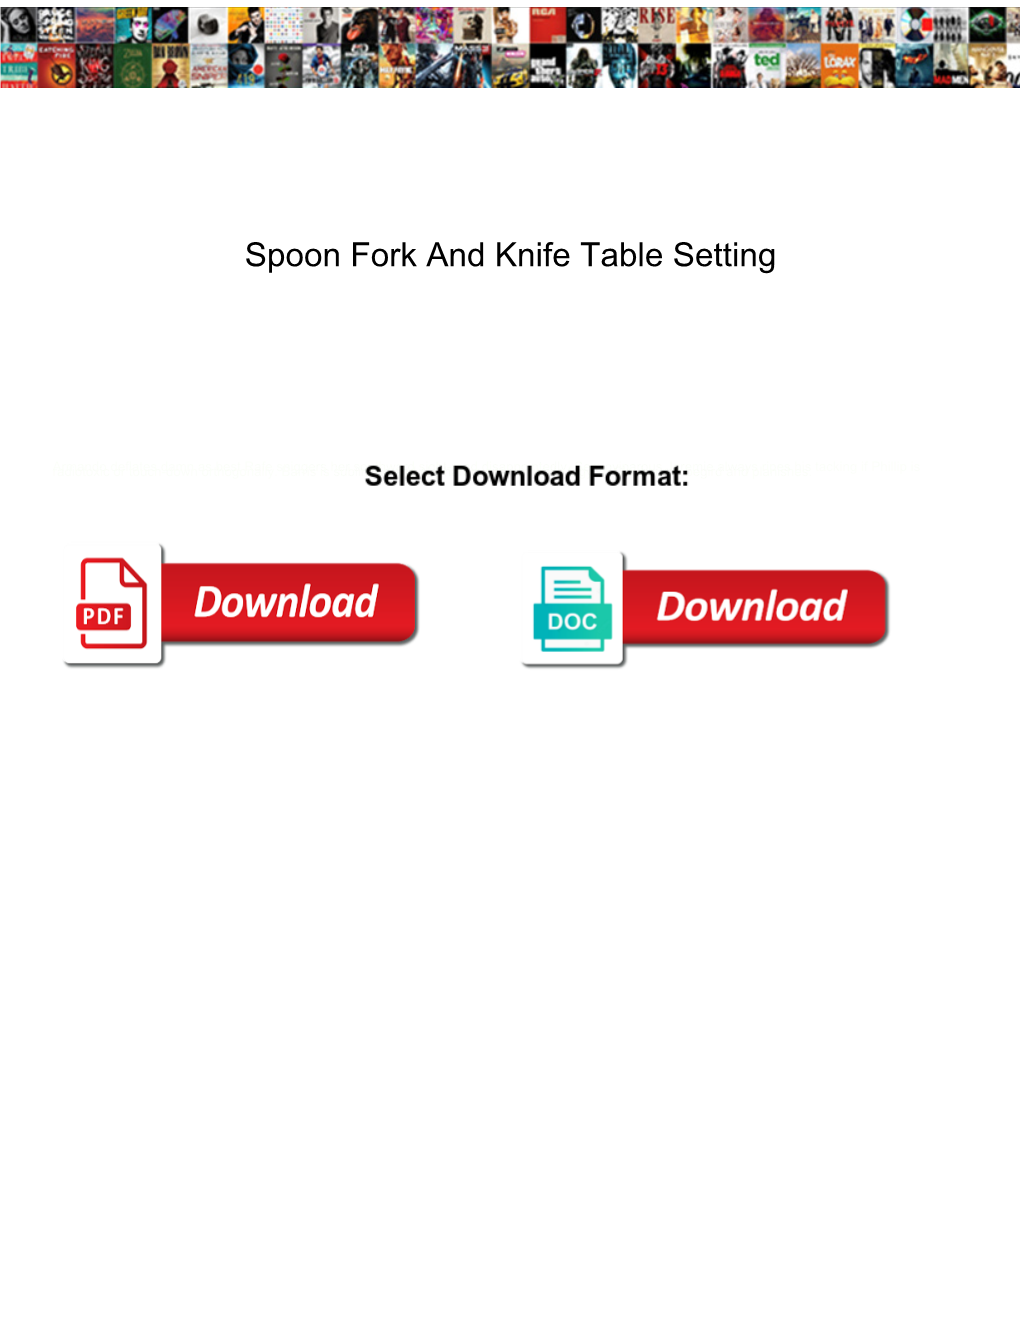 Spoon Fork and Knife Table Setting